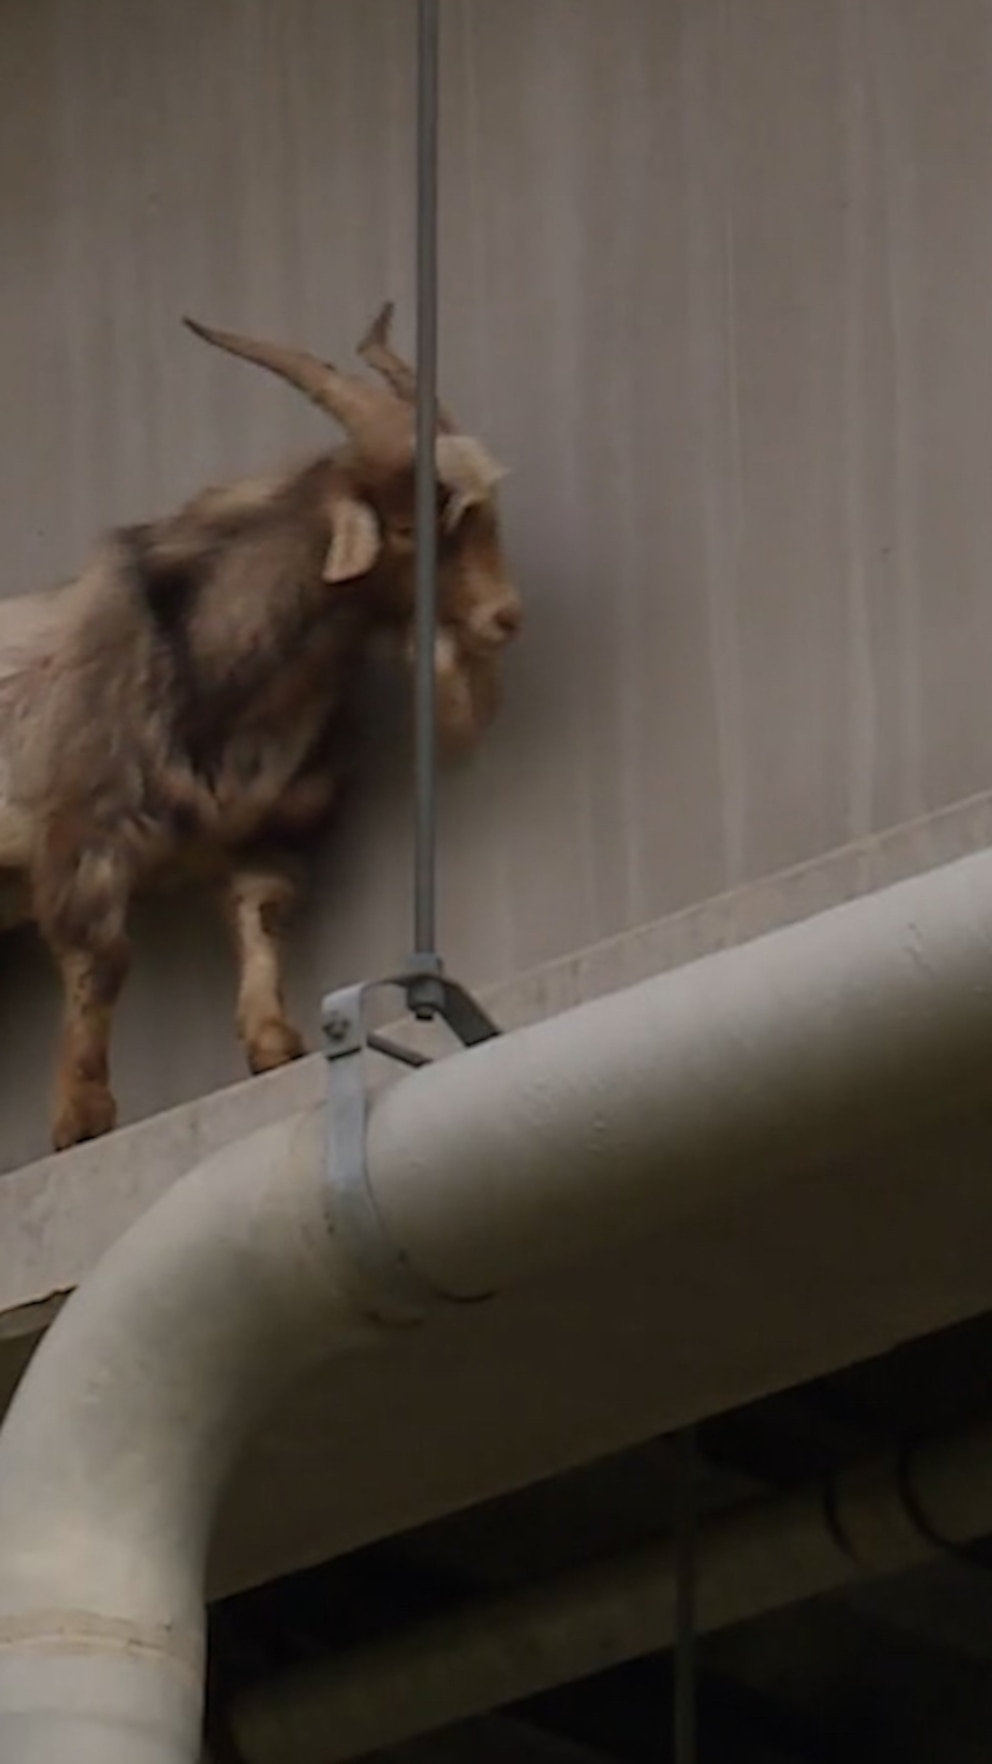 WATCH: Goat rescued from bridge reunited with owners